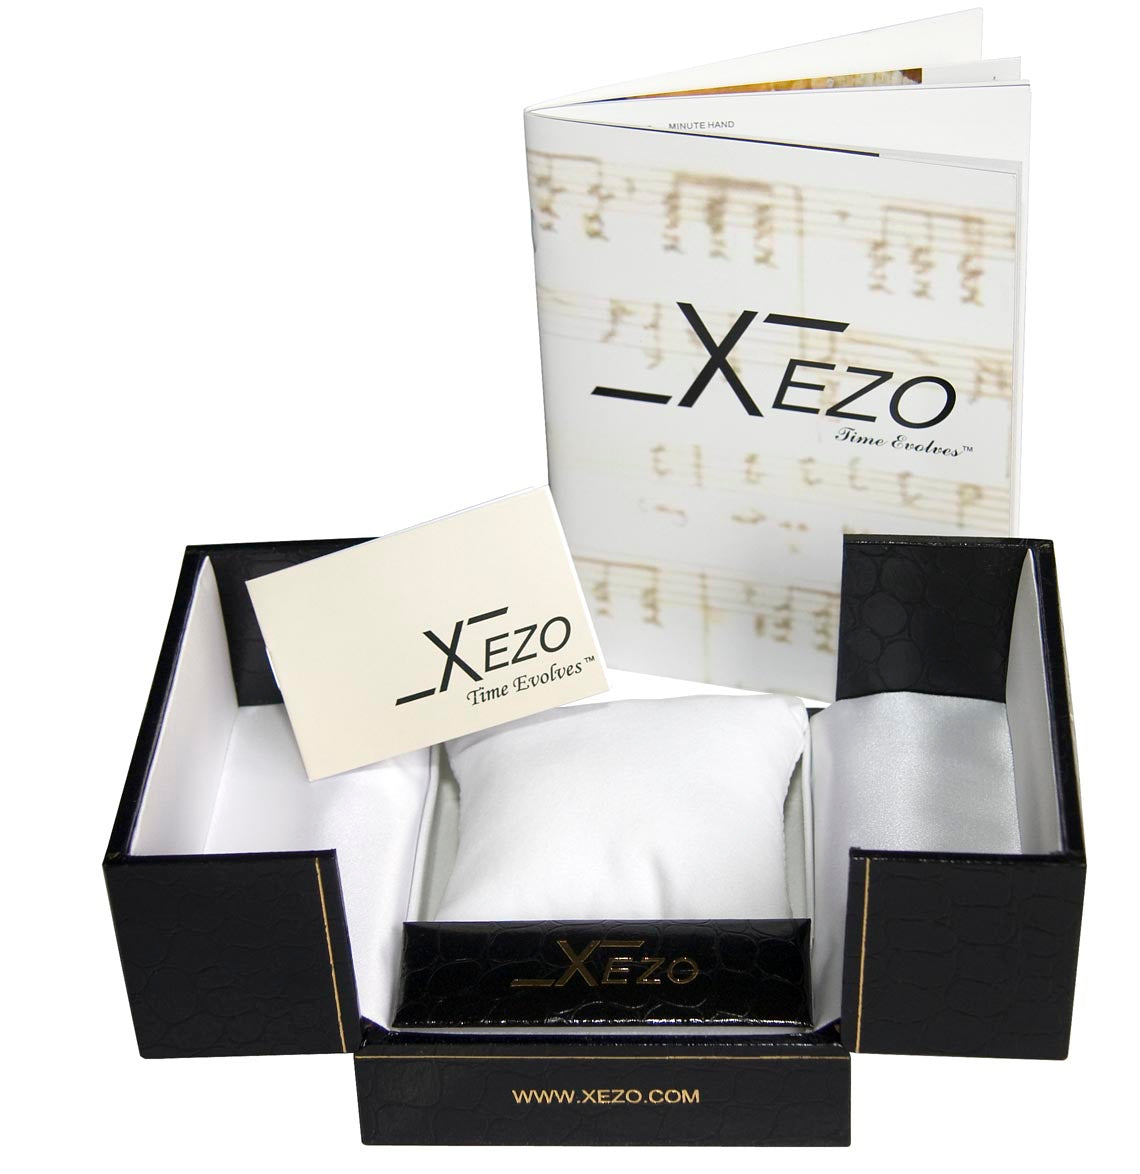 Xezo - Black gift box, certificate, and manual of the Air Commando D44 watch